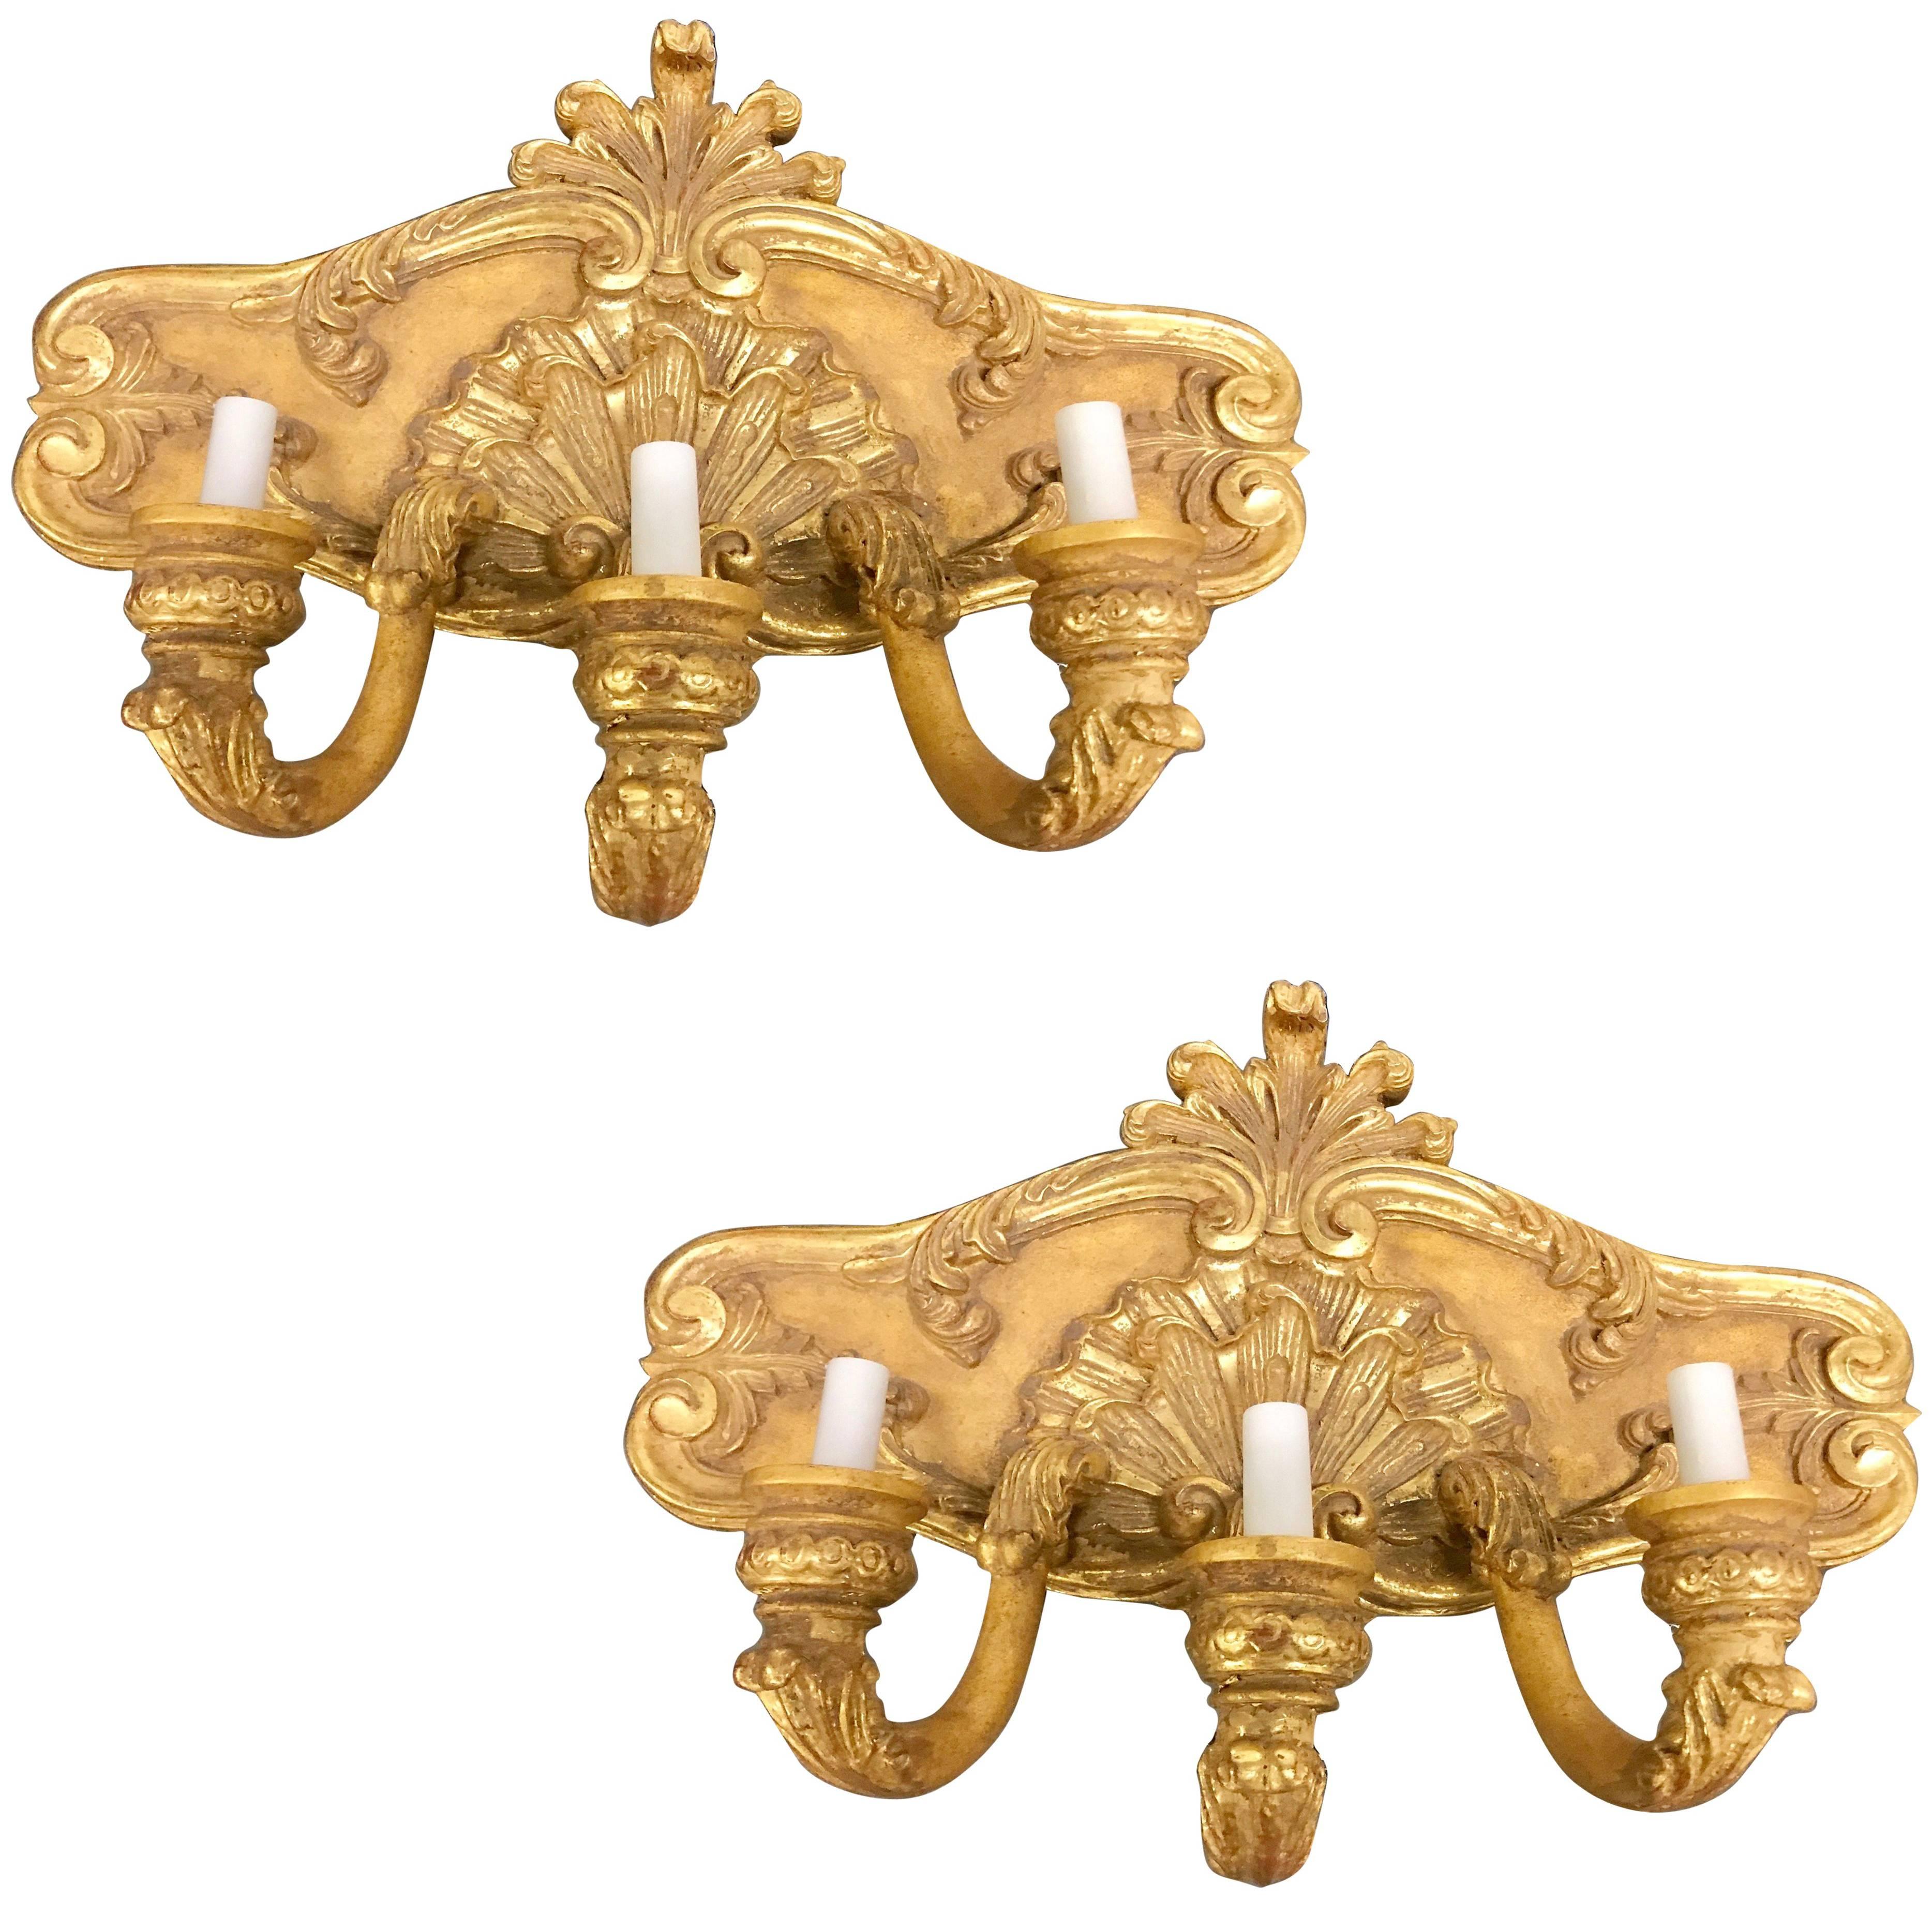 Large Pair of French Giltwood Three-Light Shell Motif Wall Sconces, Electrified